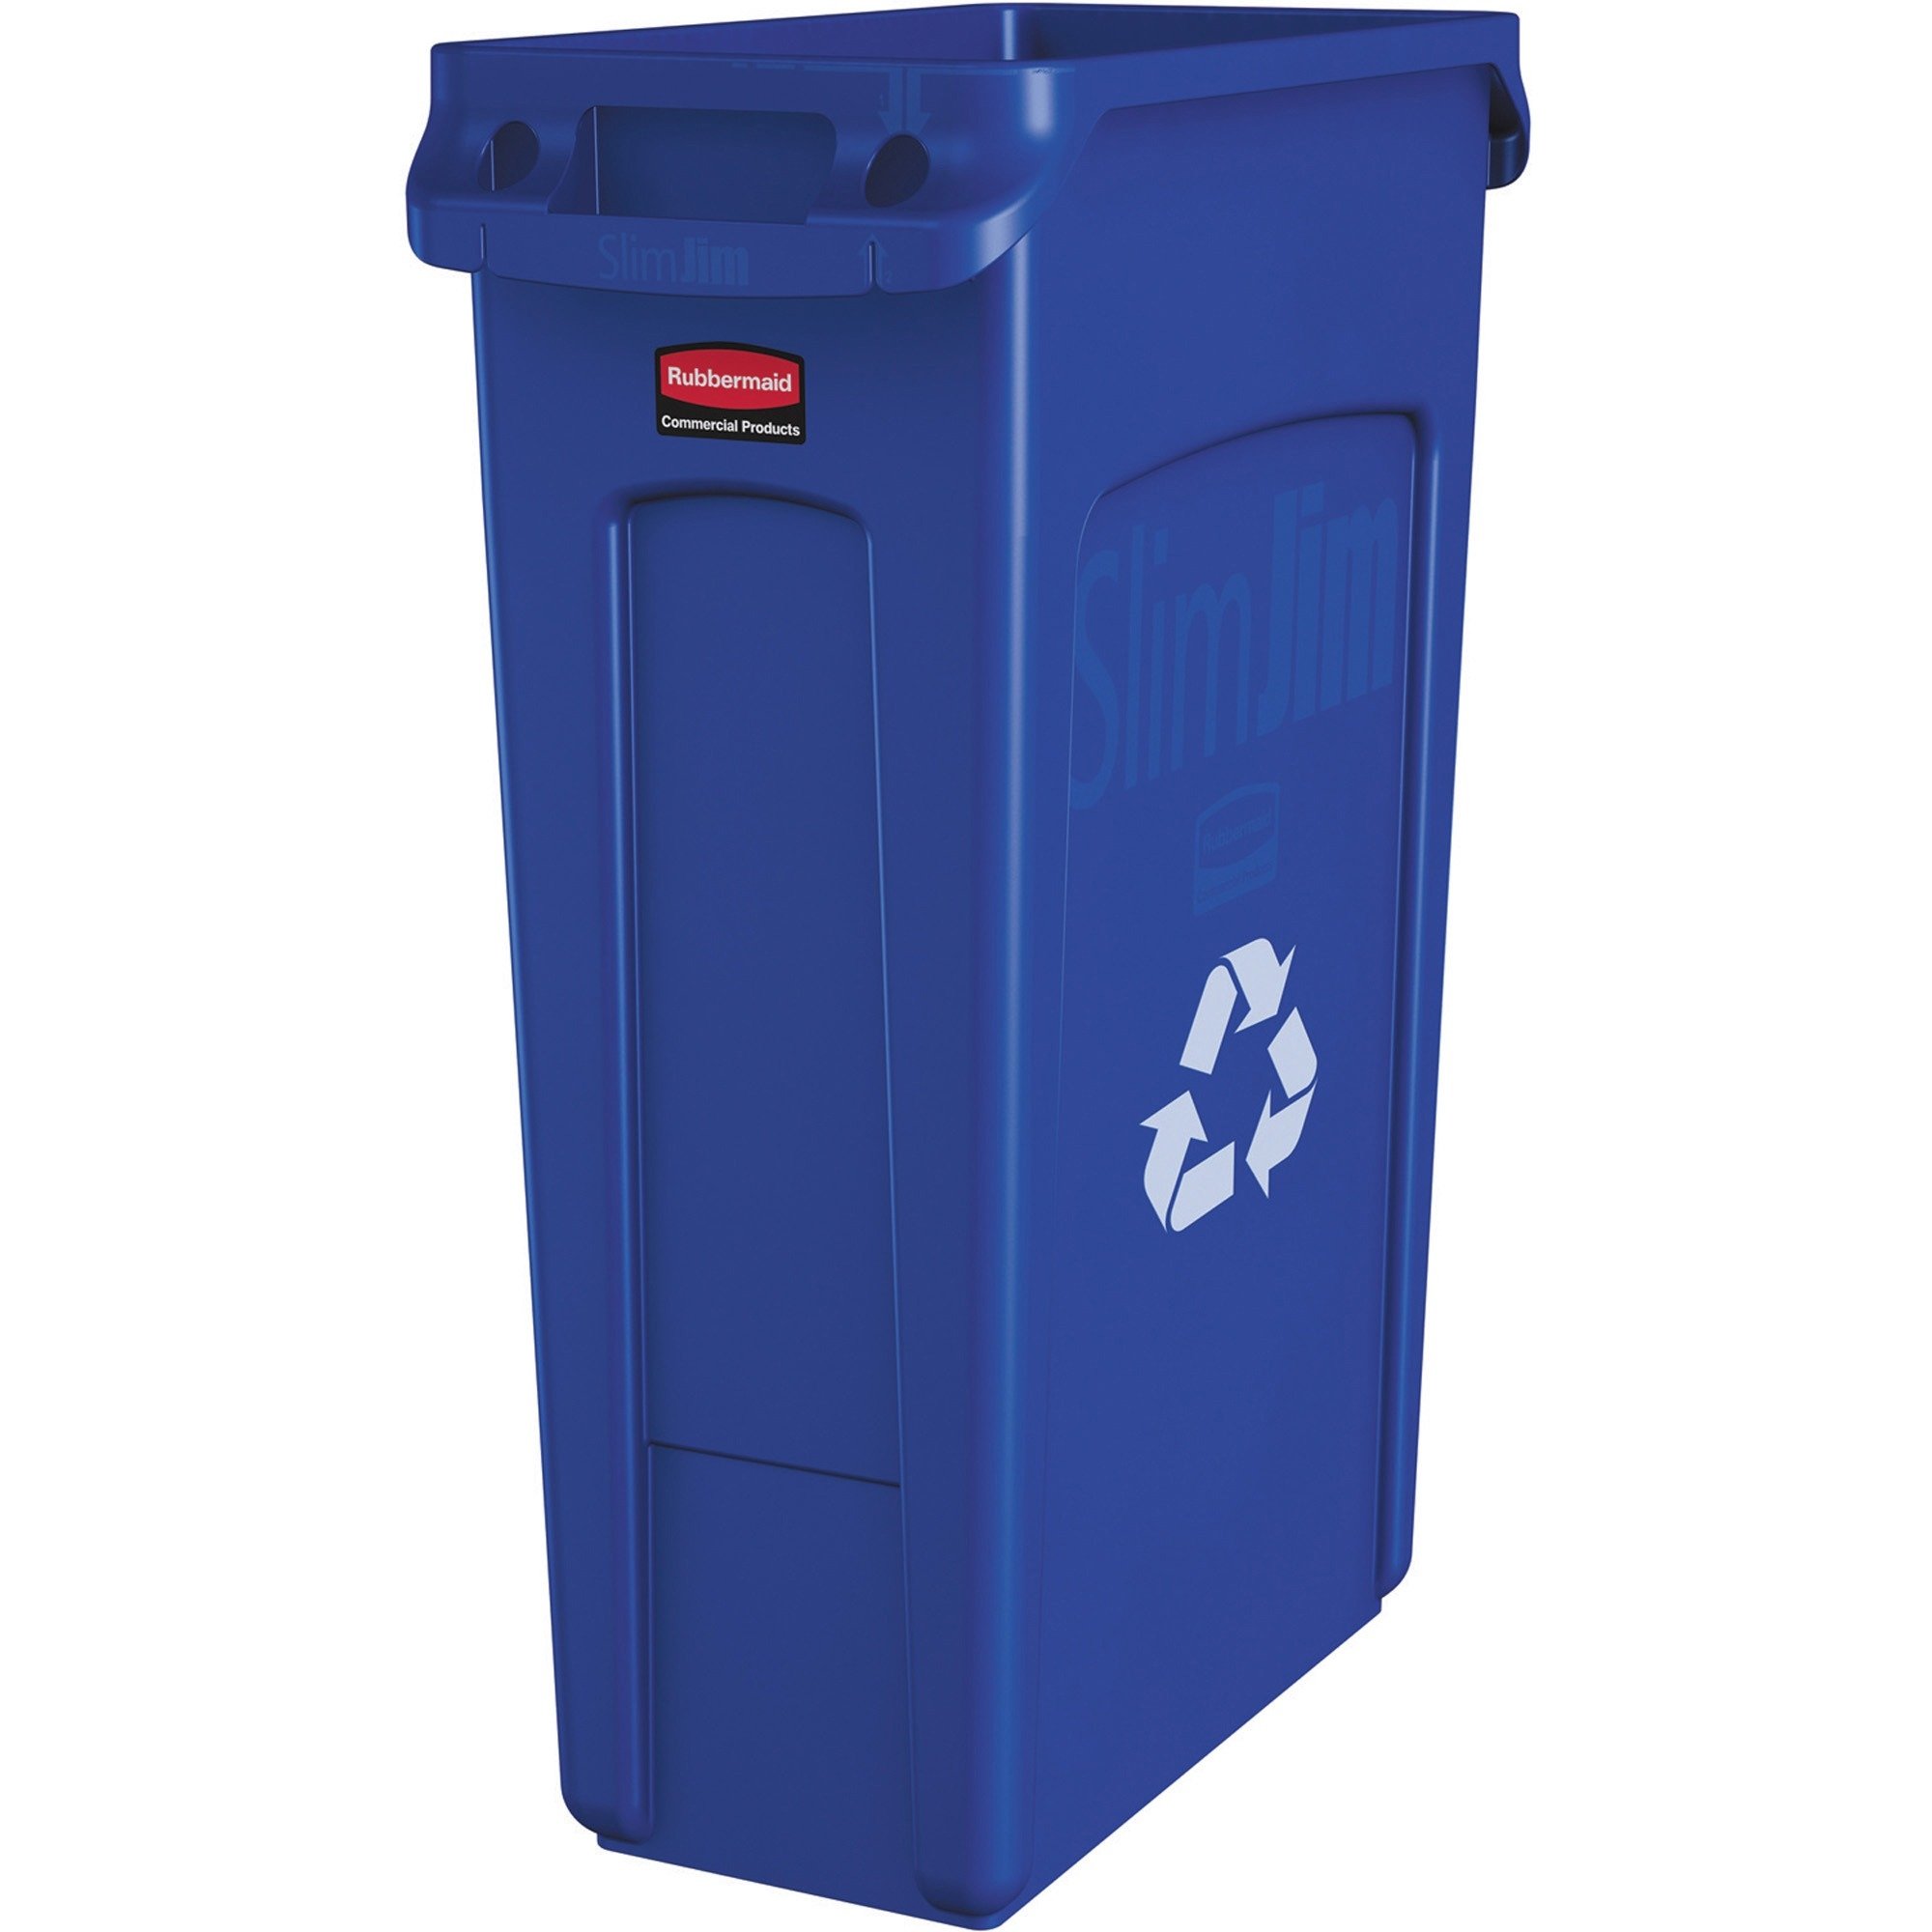 Rubbermaid Slim Jim Venting Recycling Container Bin - Blue